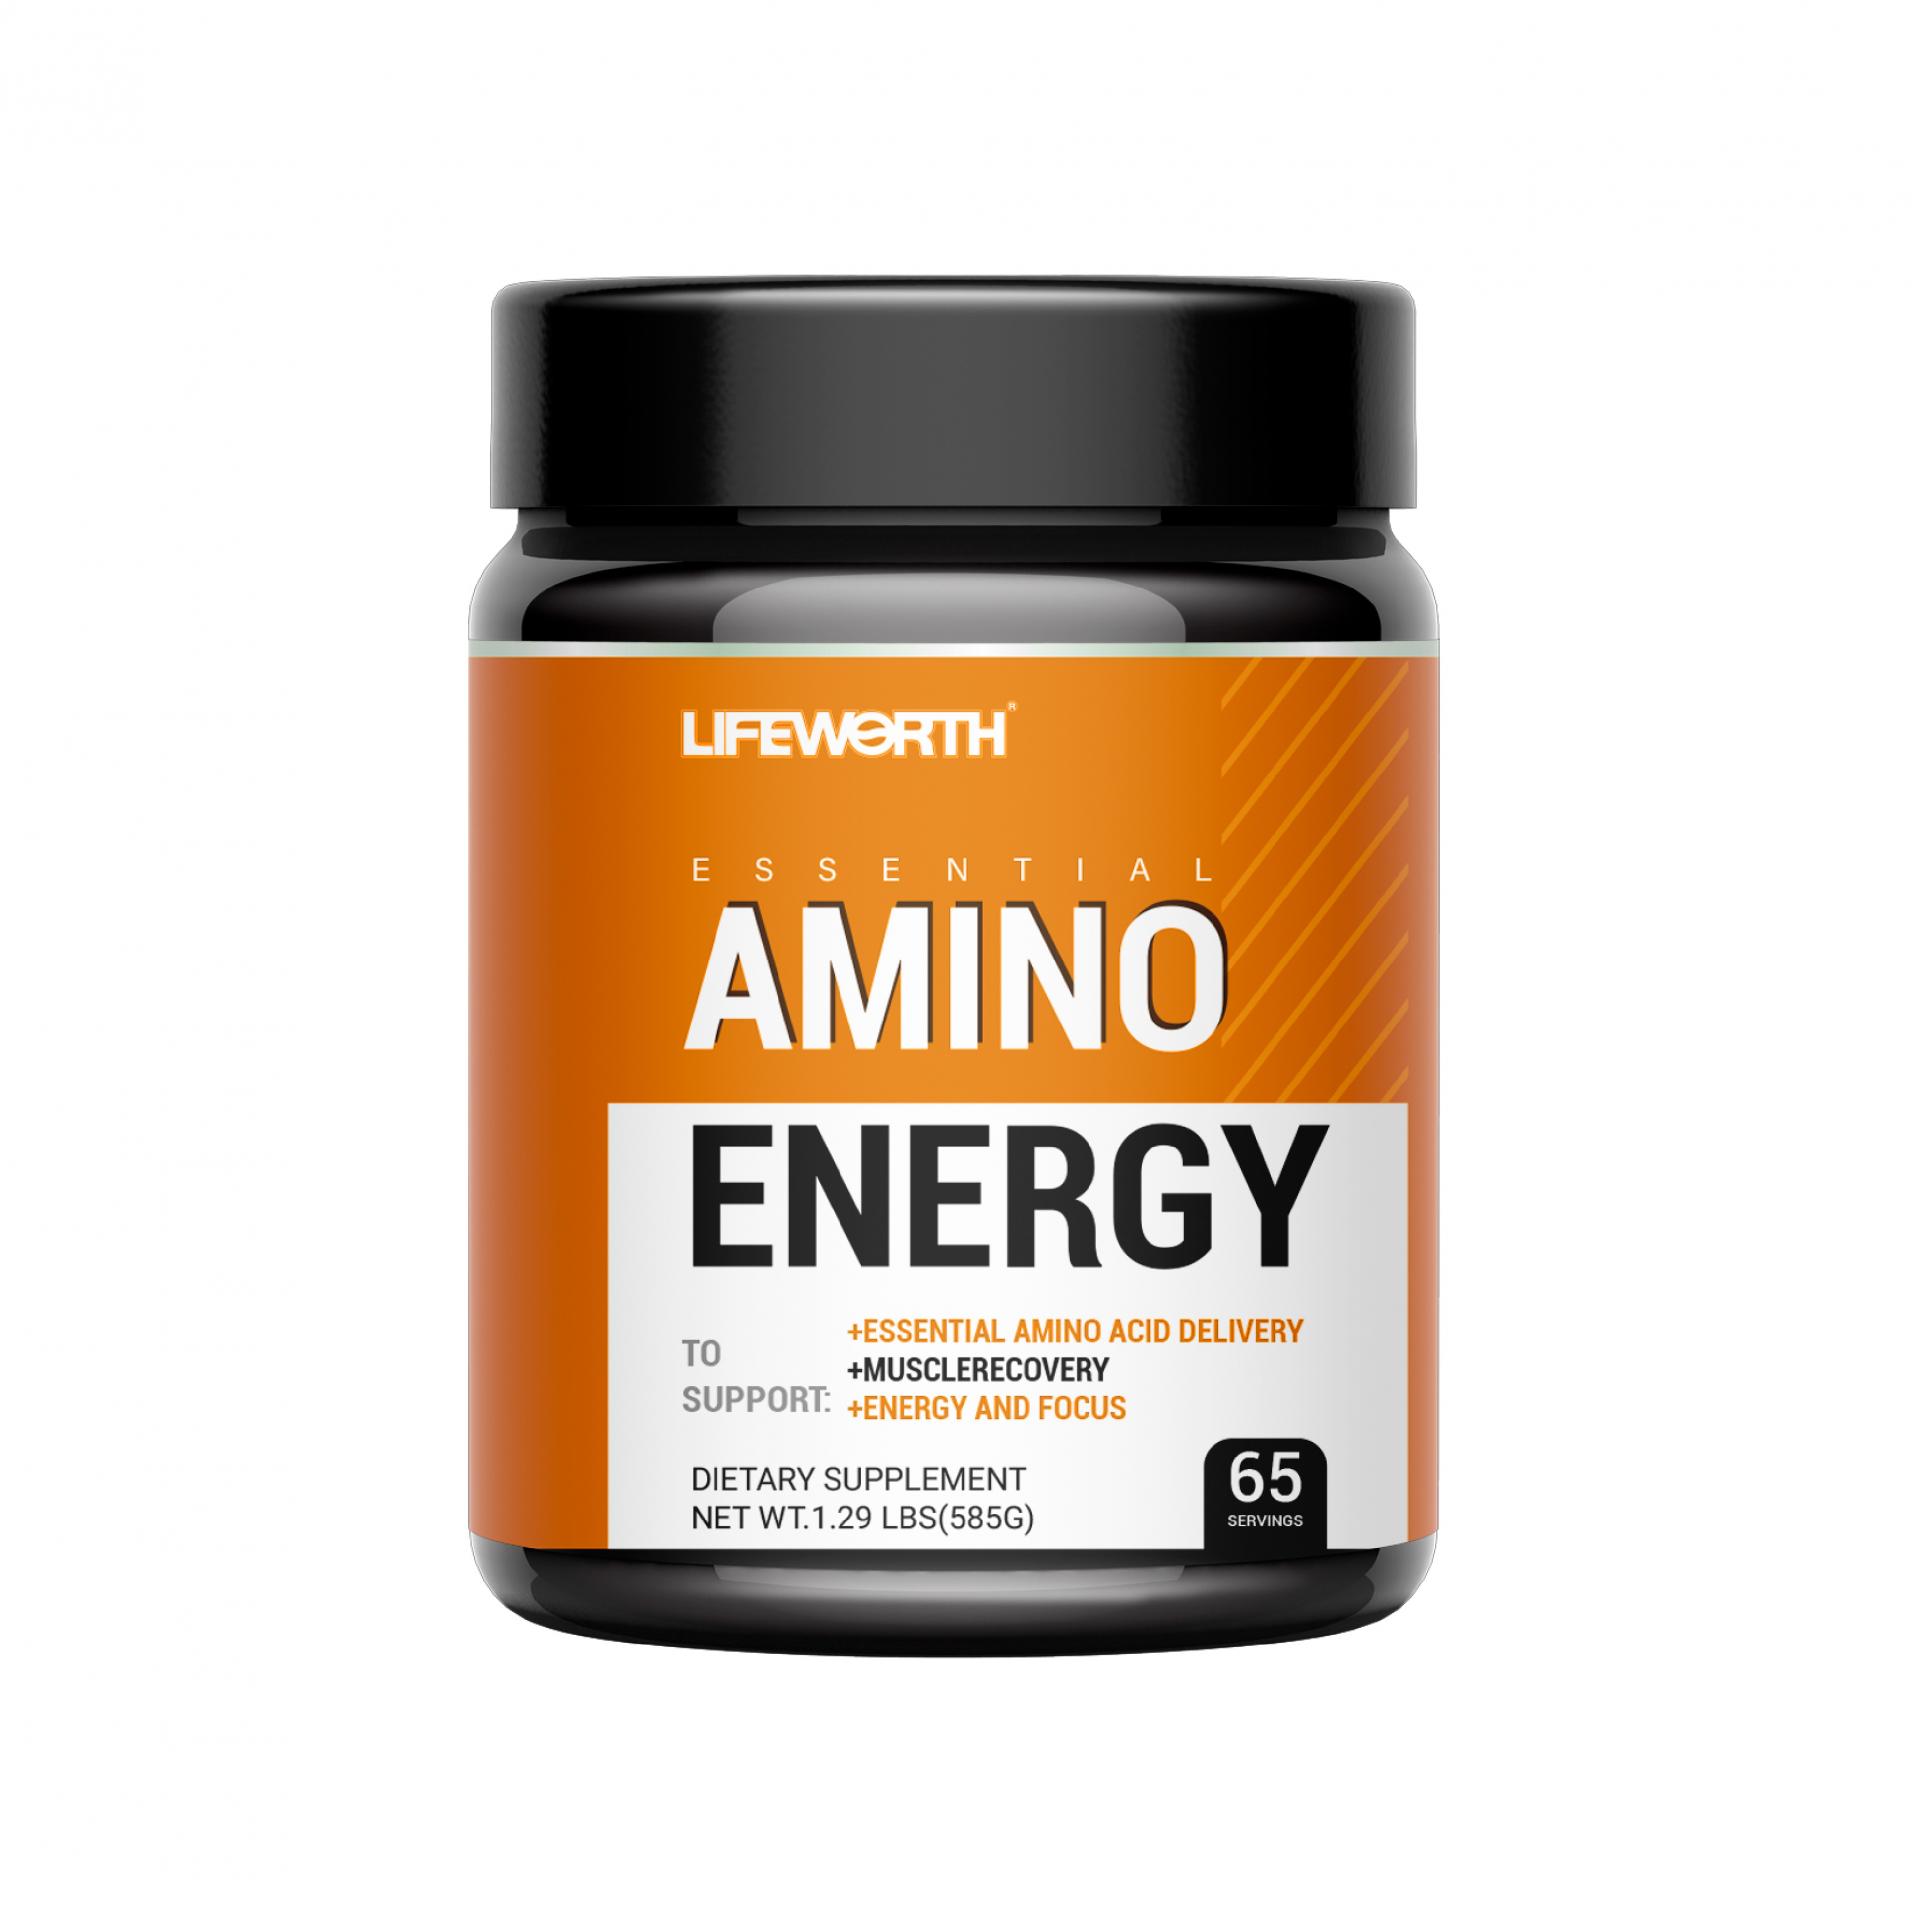 Amino Energy Pre Workout Powder, Energy Drink with Amino Acids, BCAA, L-Glutamine and L-Leucine, Food Supplement 